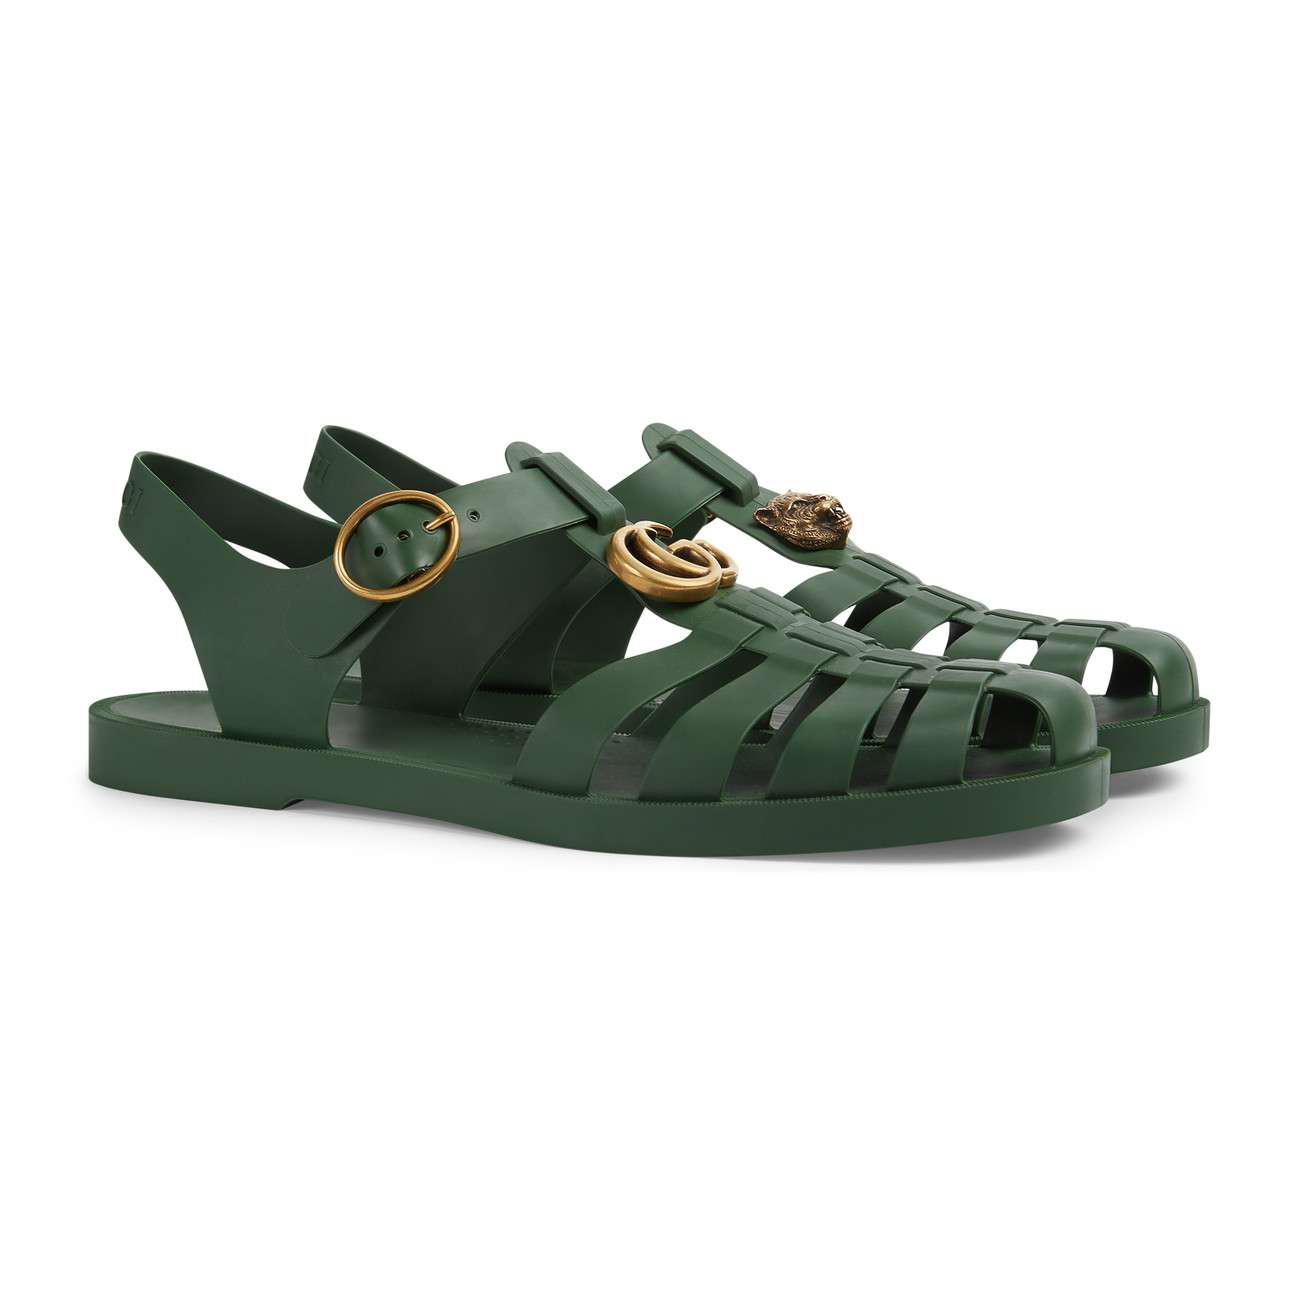 Aprender acerca 71+ imagen gucci mens sandals with strap - Giaoduchtn ...